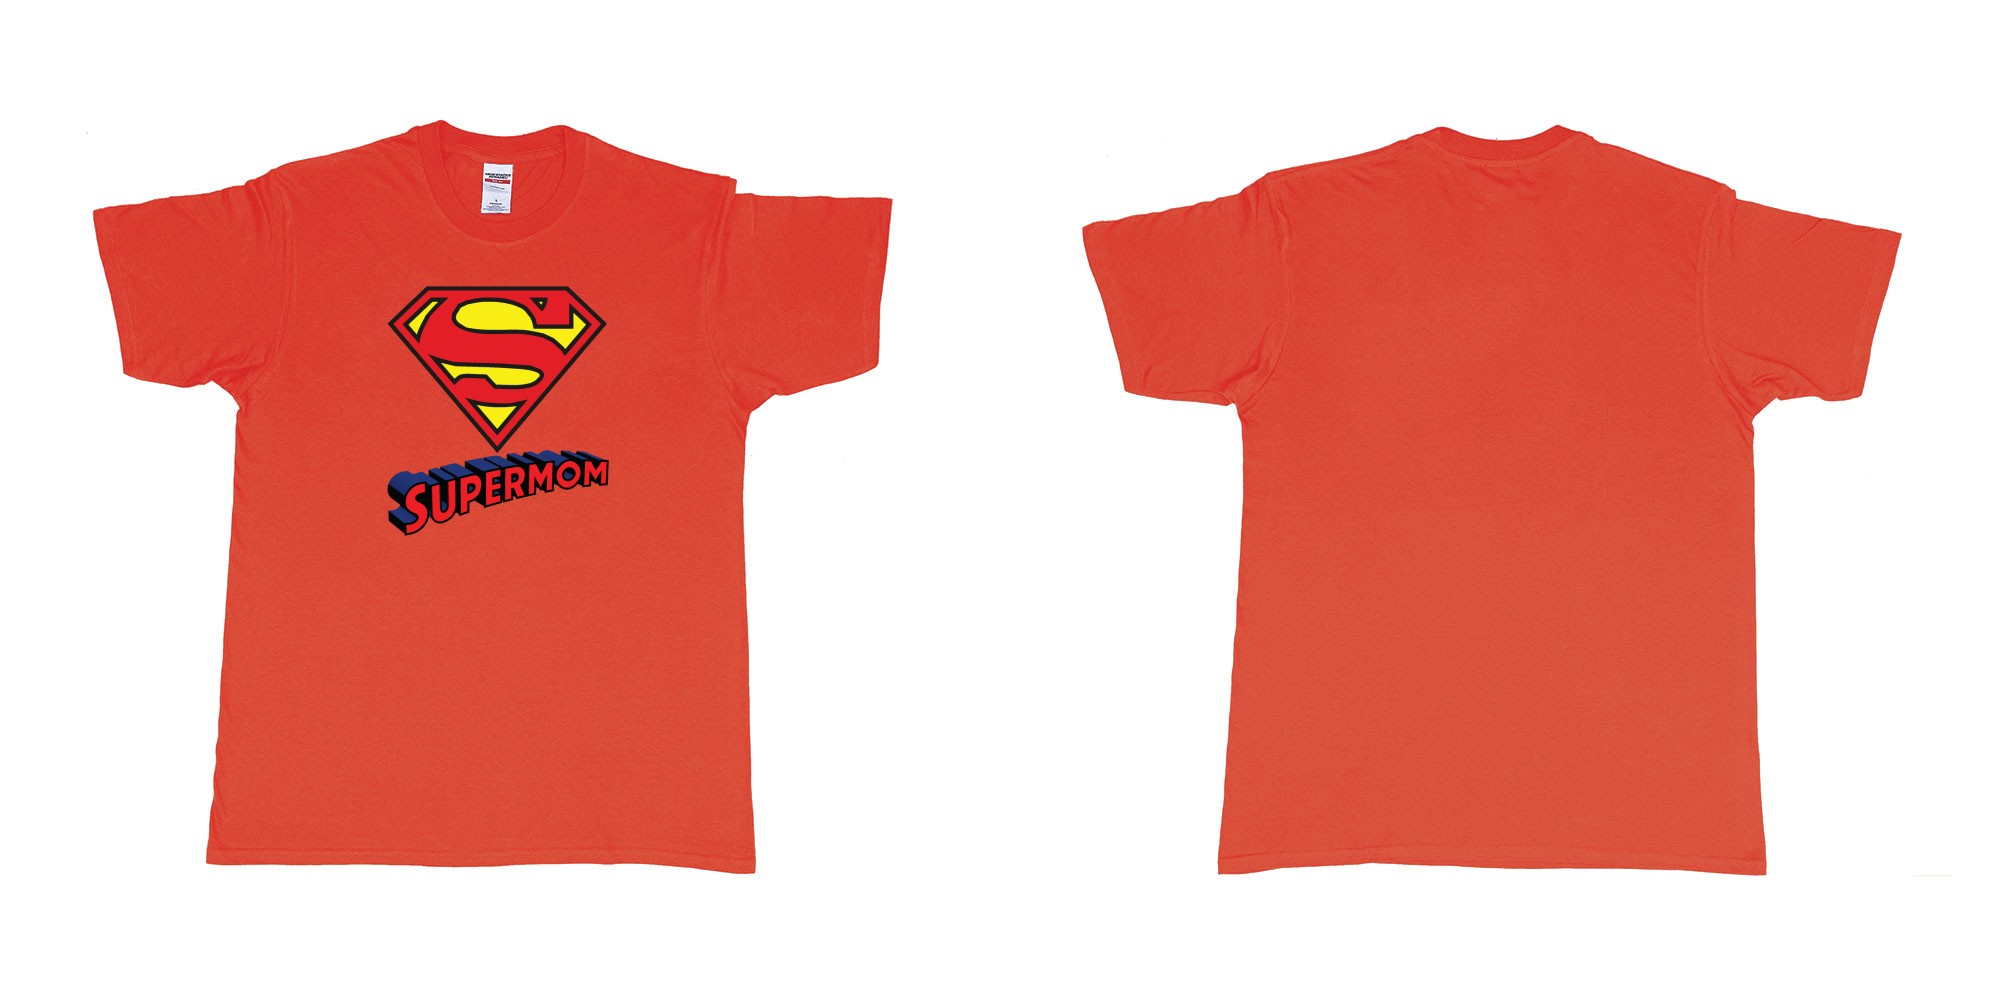 Custom tshirt design superman logo with own custom text print bali in fabric color red choice your own text made in Bali by The Pirate Way